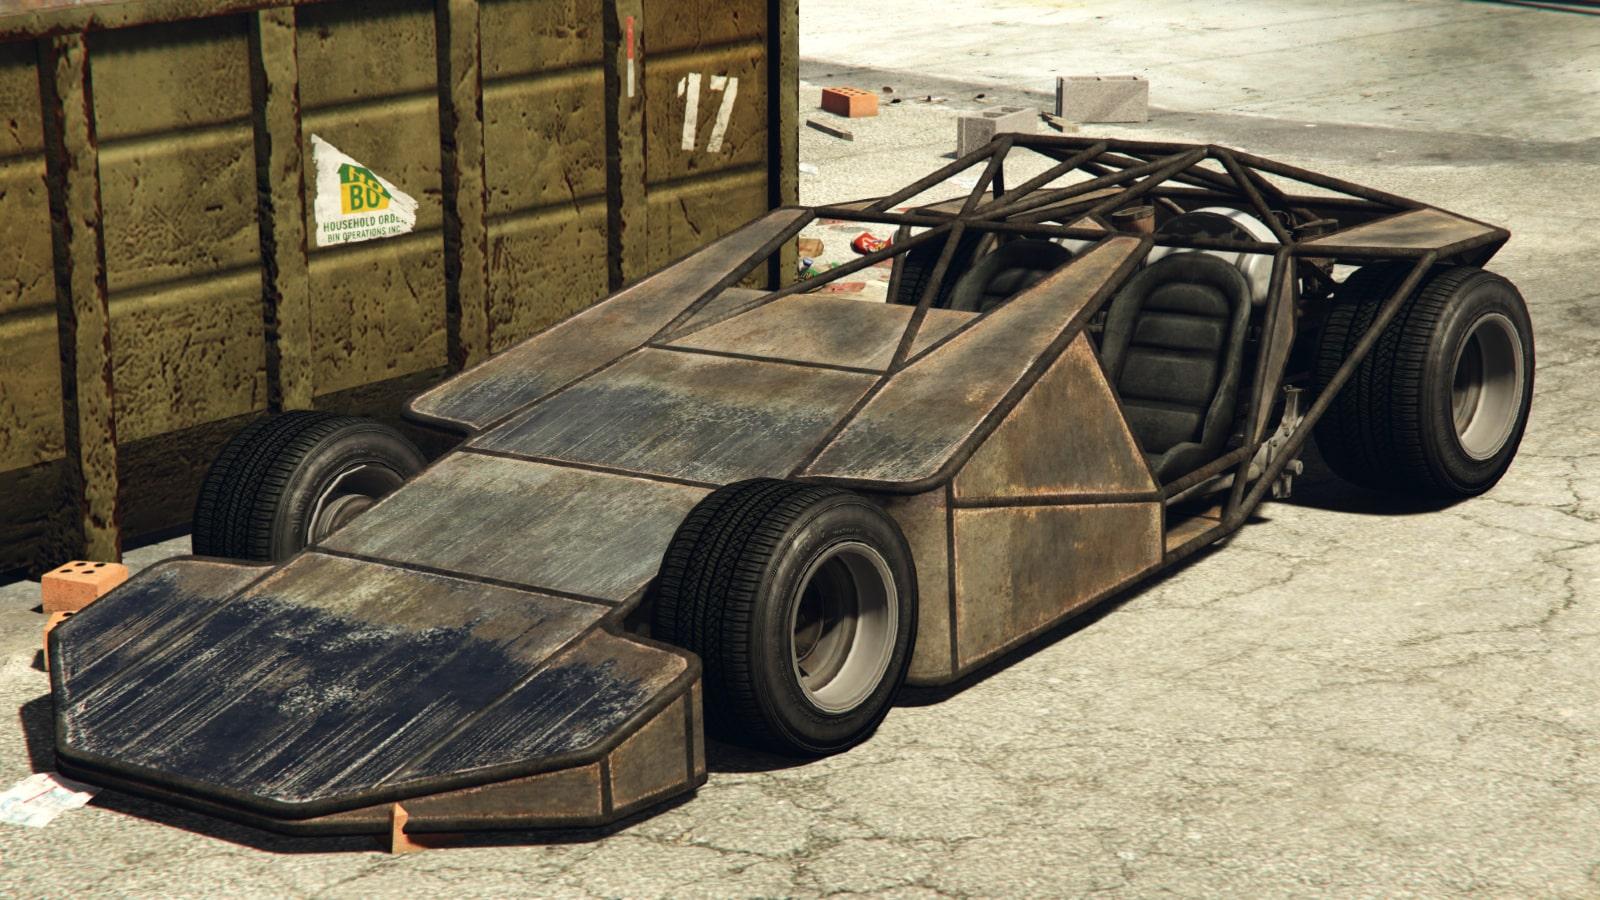 The Ramp Buggy in GTA Online is a special car with special tricks